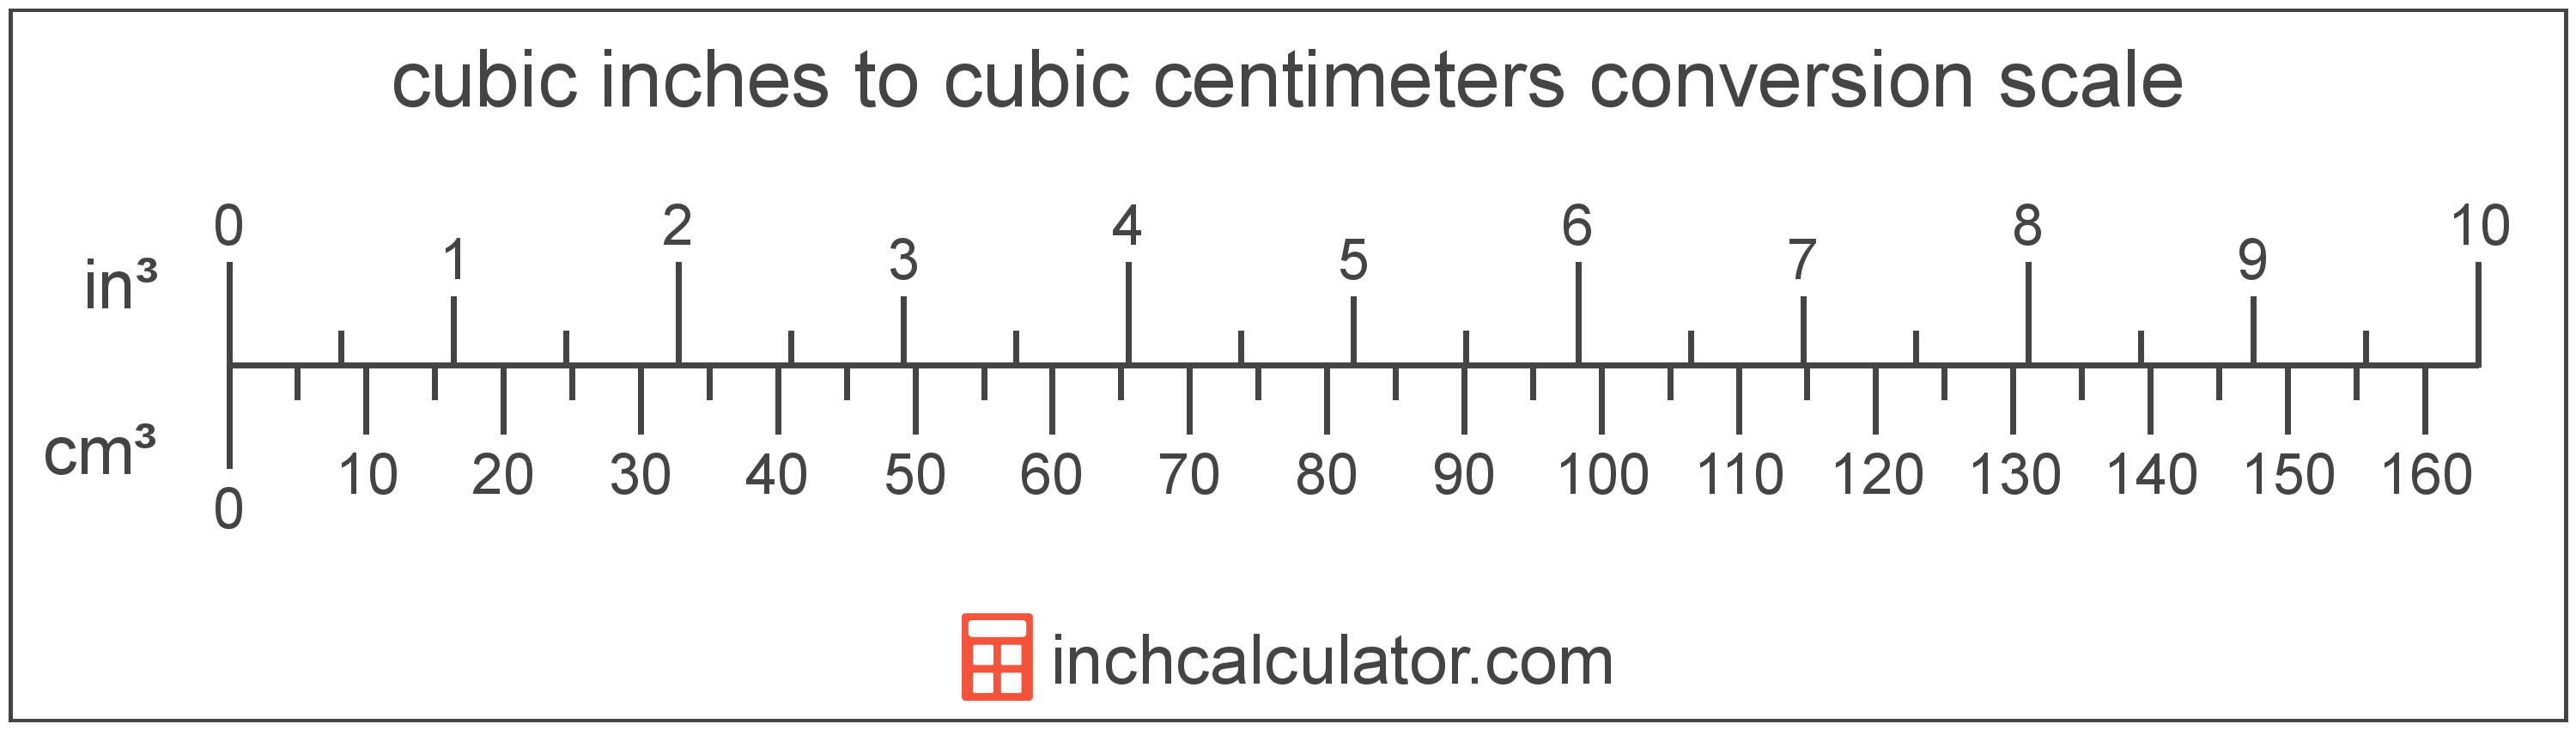 Cc To Cubic Inch Conversion Chart